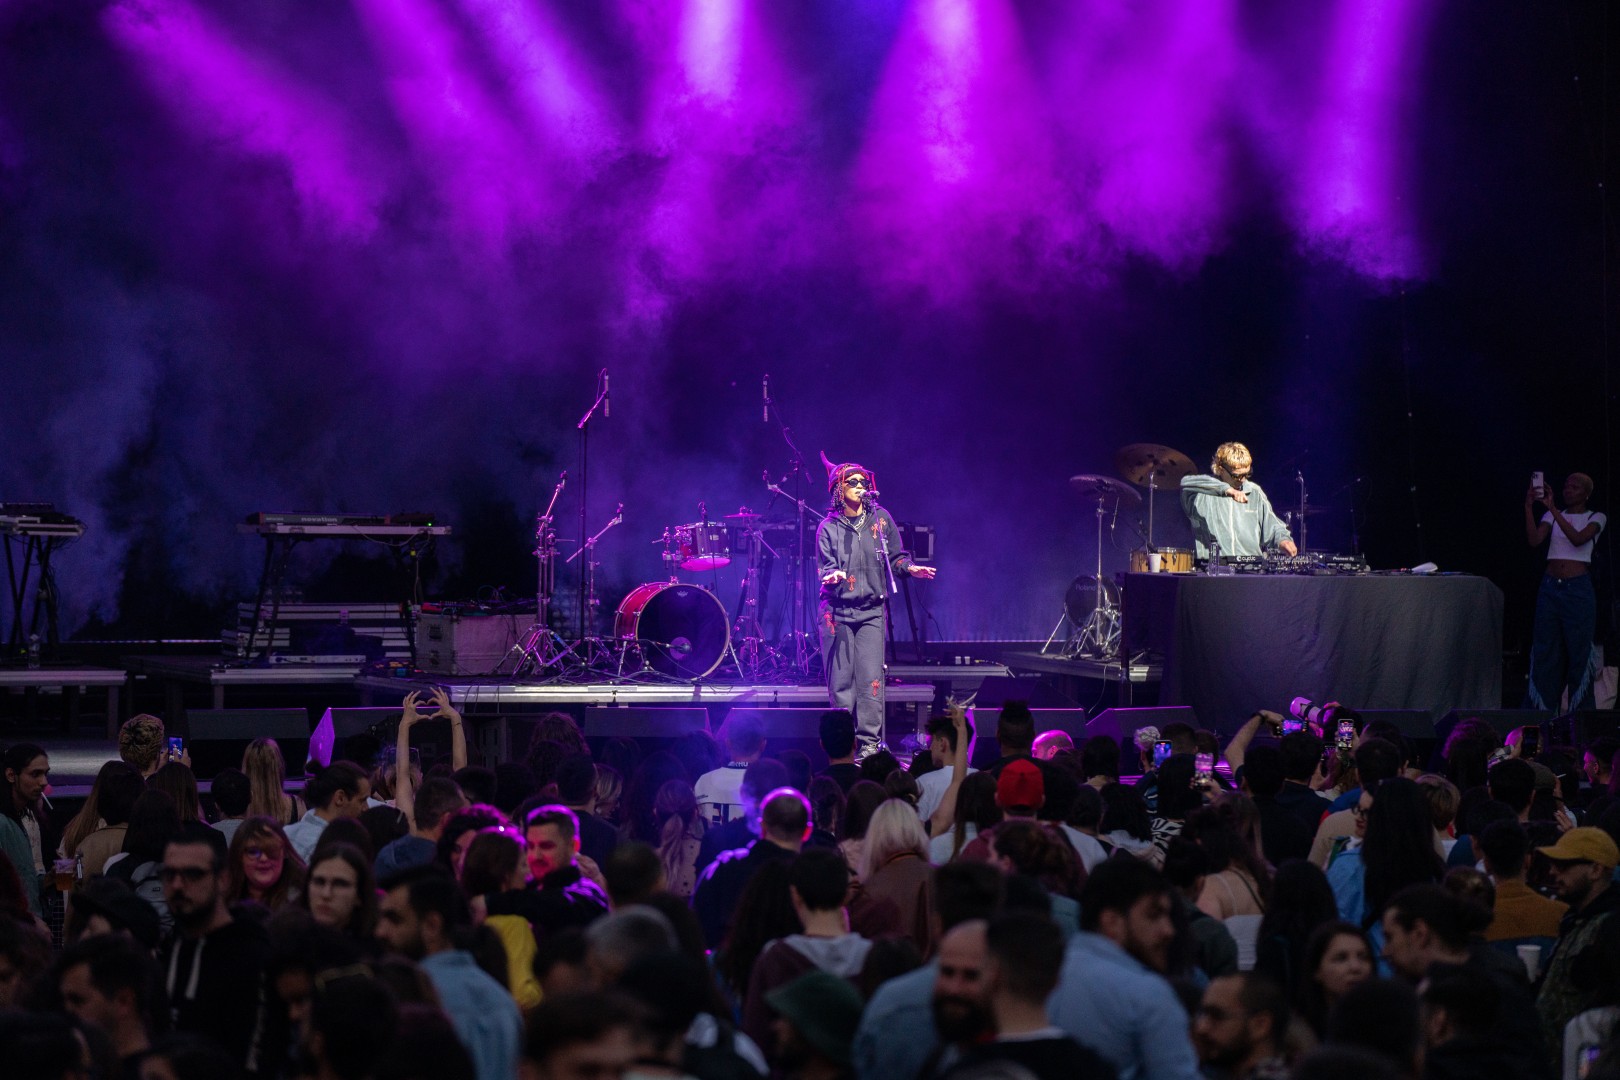 IAMDDB at Arenele Romane in Bucharest on May 19, 2022 (c71d9280eb)